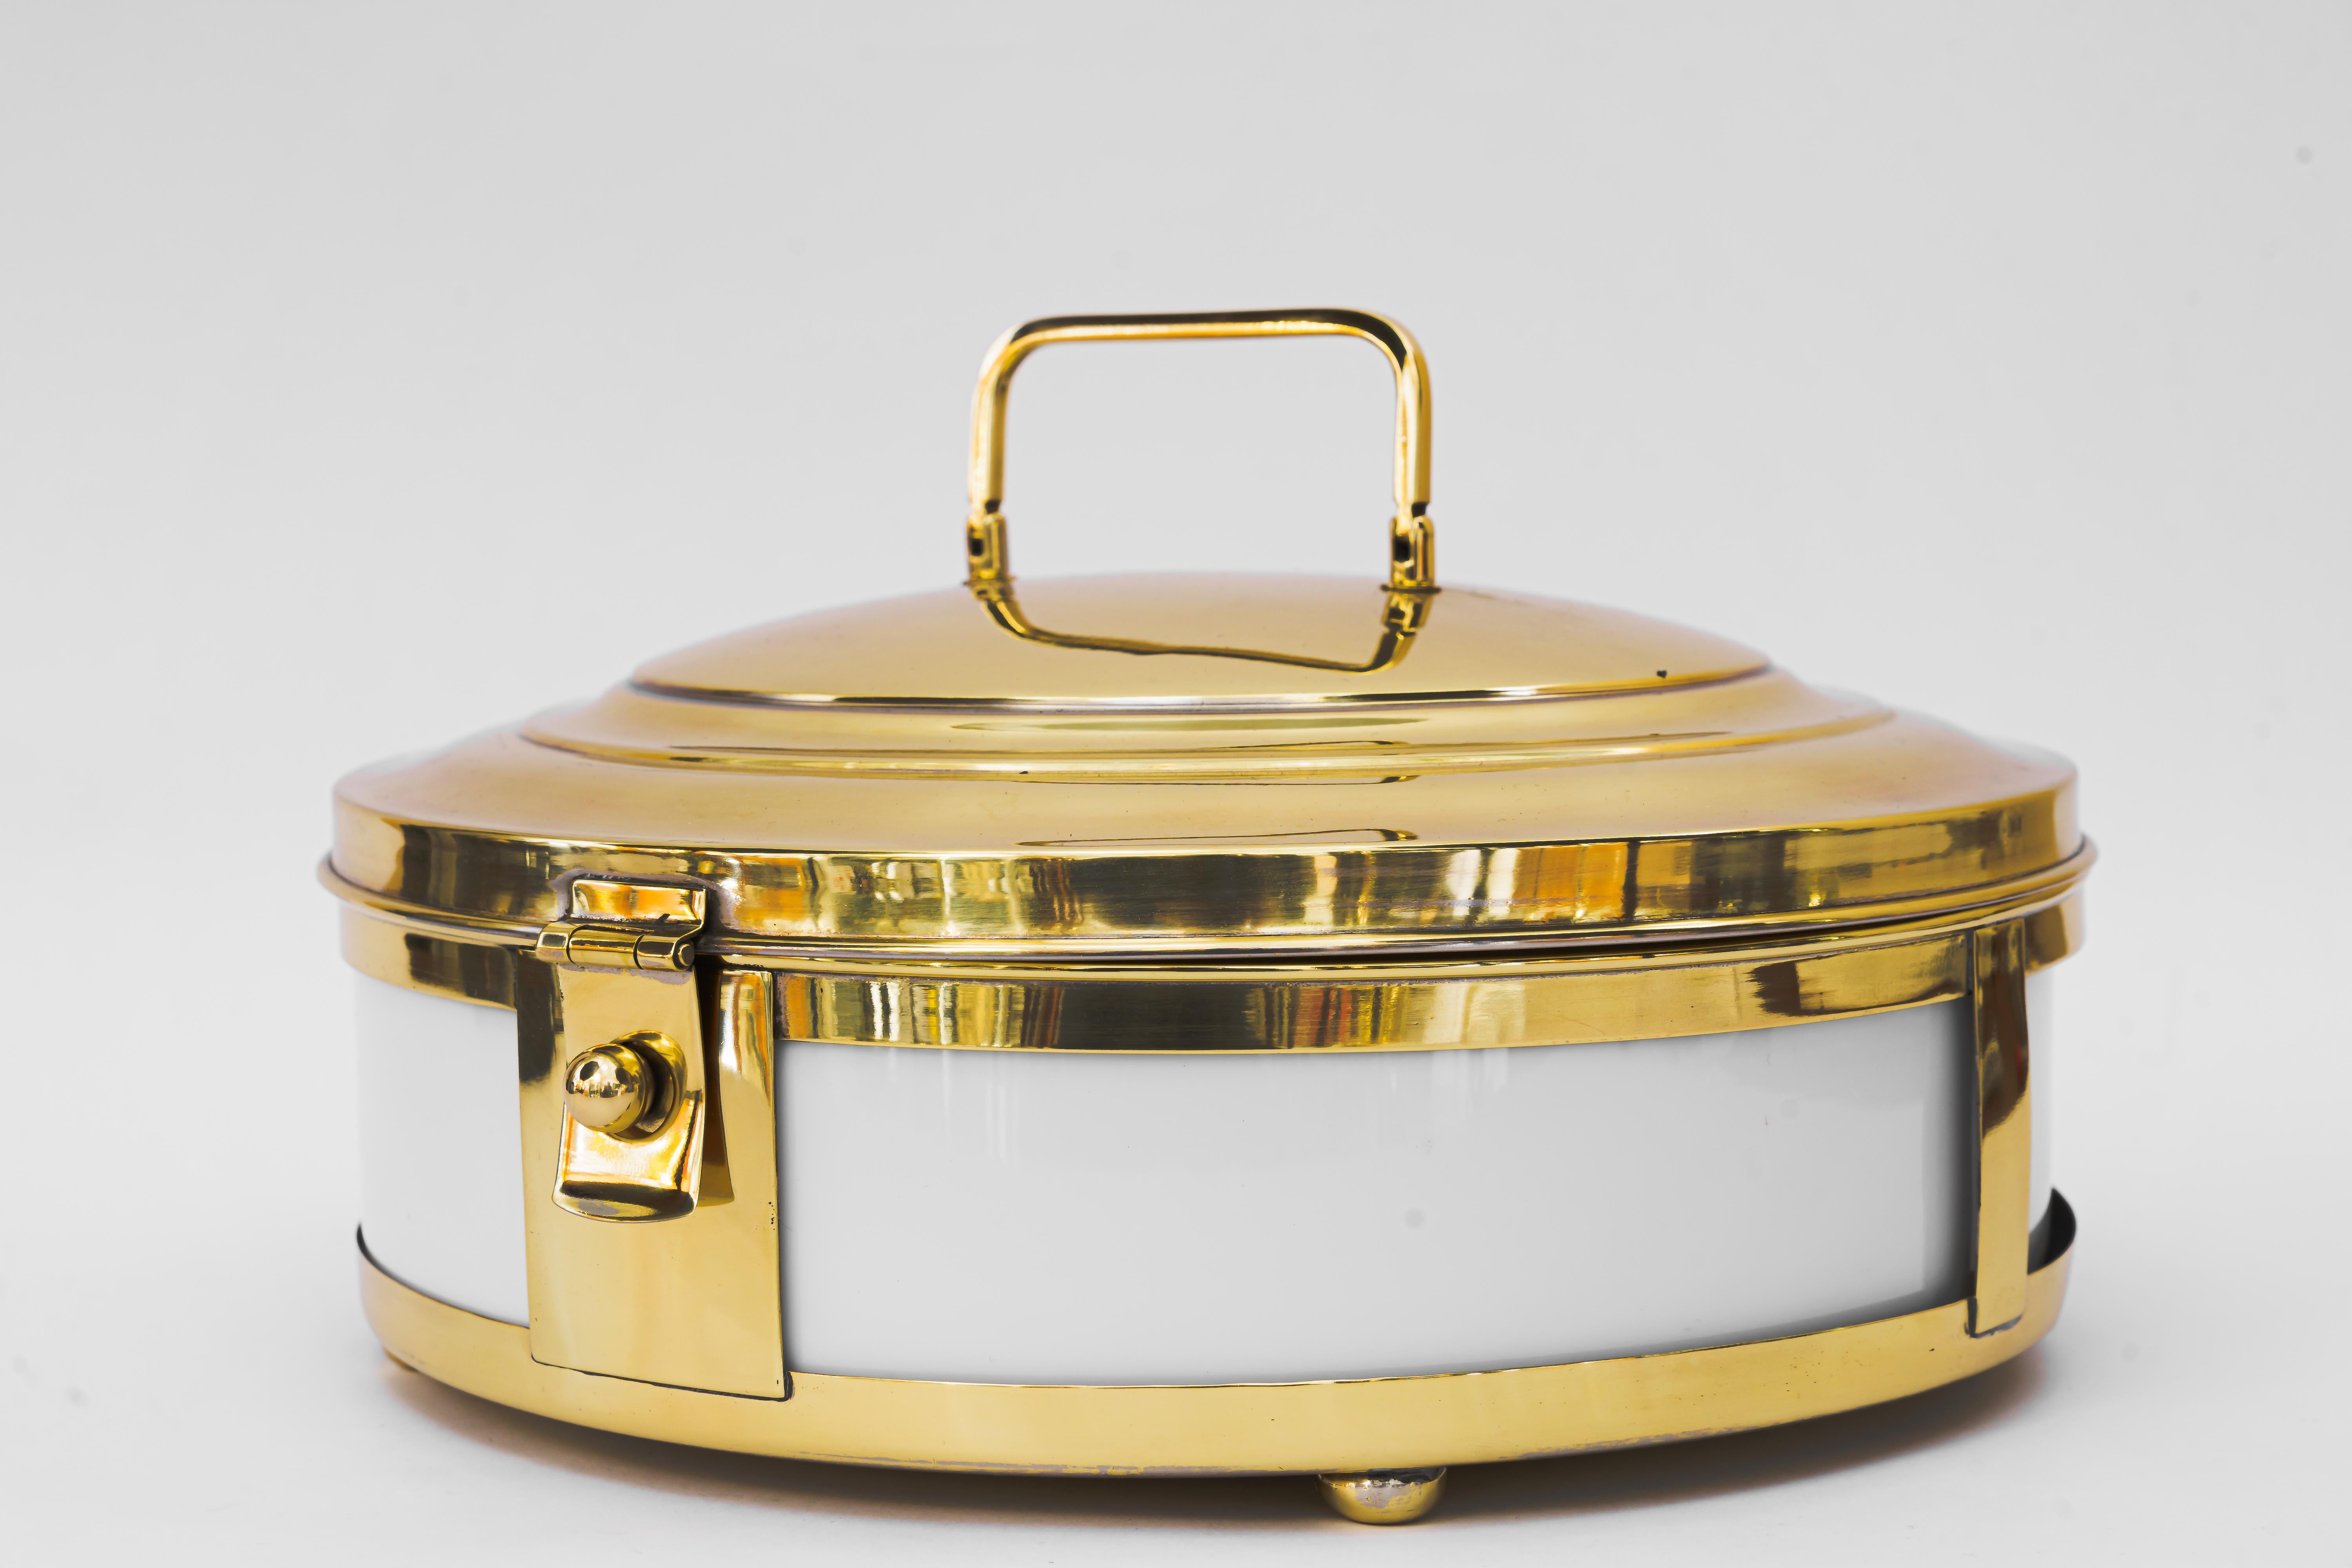 Rare bread box vienna around 1920s.
Brass polished and stove enameled.
Original opal glass inside.